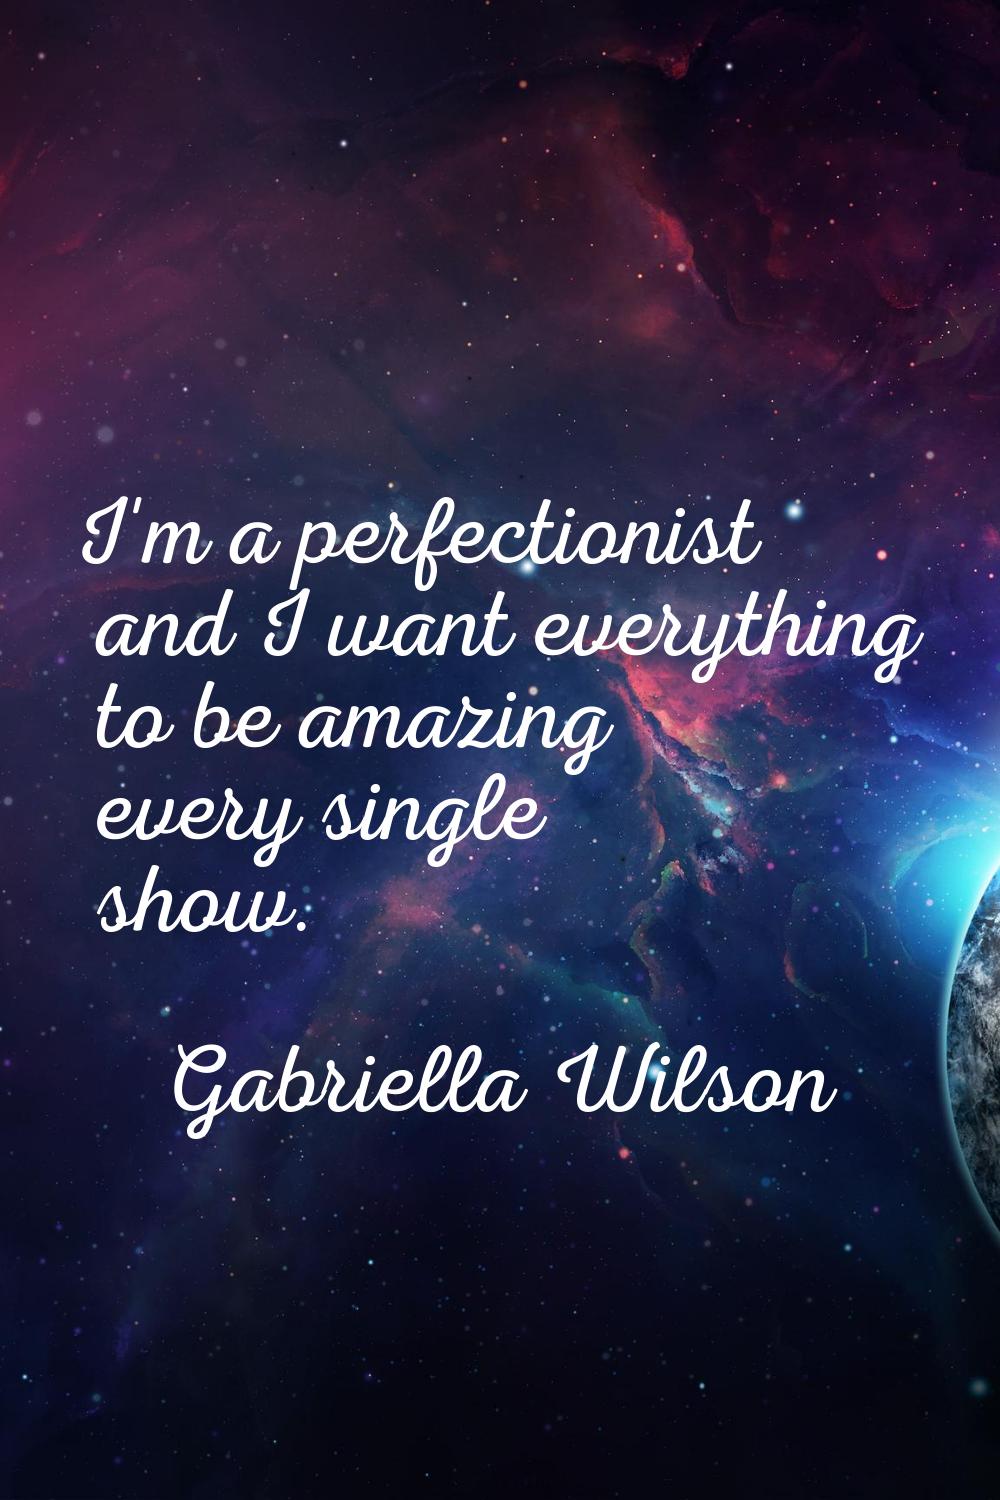 I'm a perfectionist and I want everything to be amazing every single show.